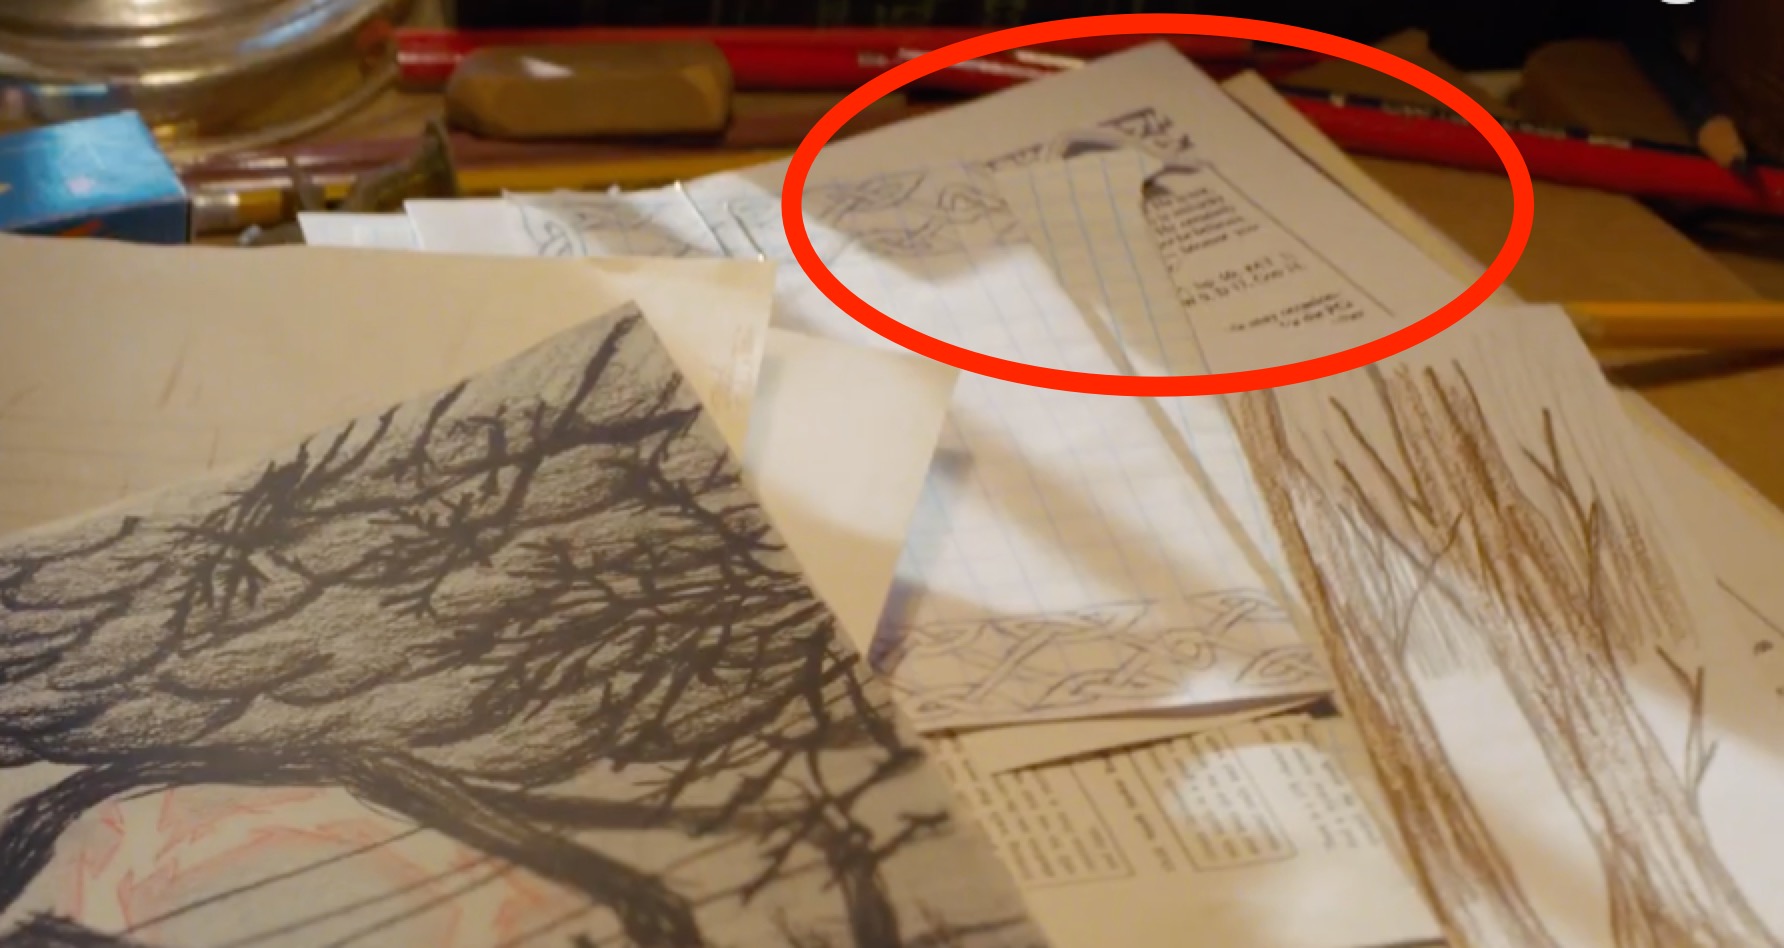 Stranger Things Ravenloft Connection Hinted At In Super Bowl Spot?